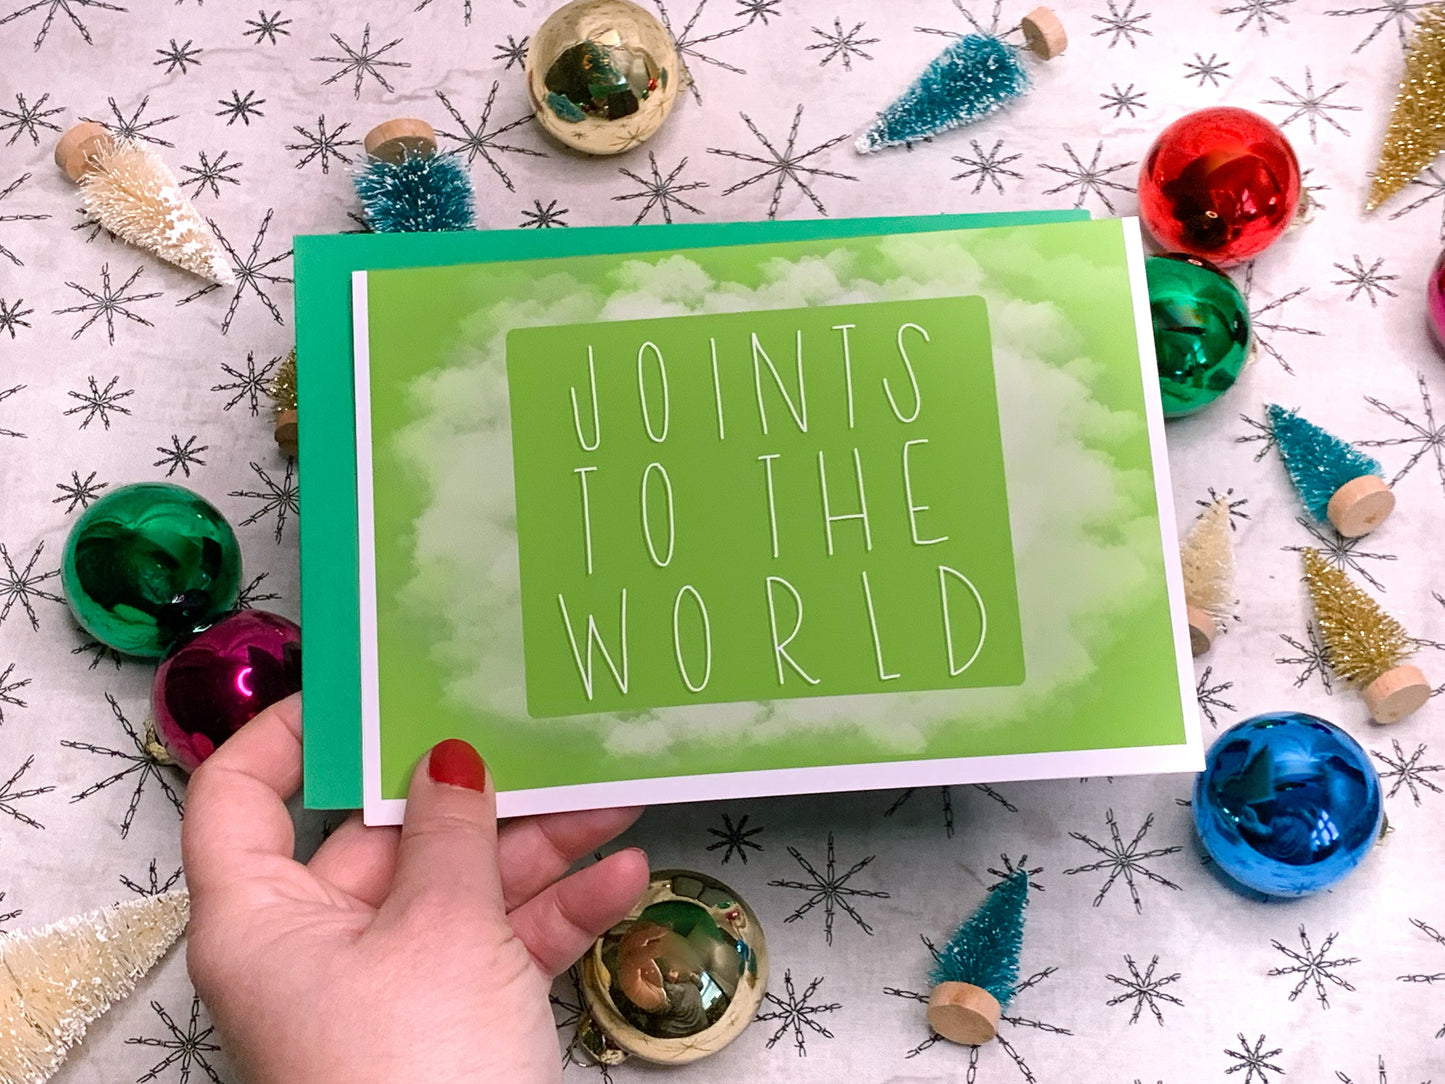 Joints to the World Cannabis Christmas Card by StoneDonut Design